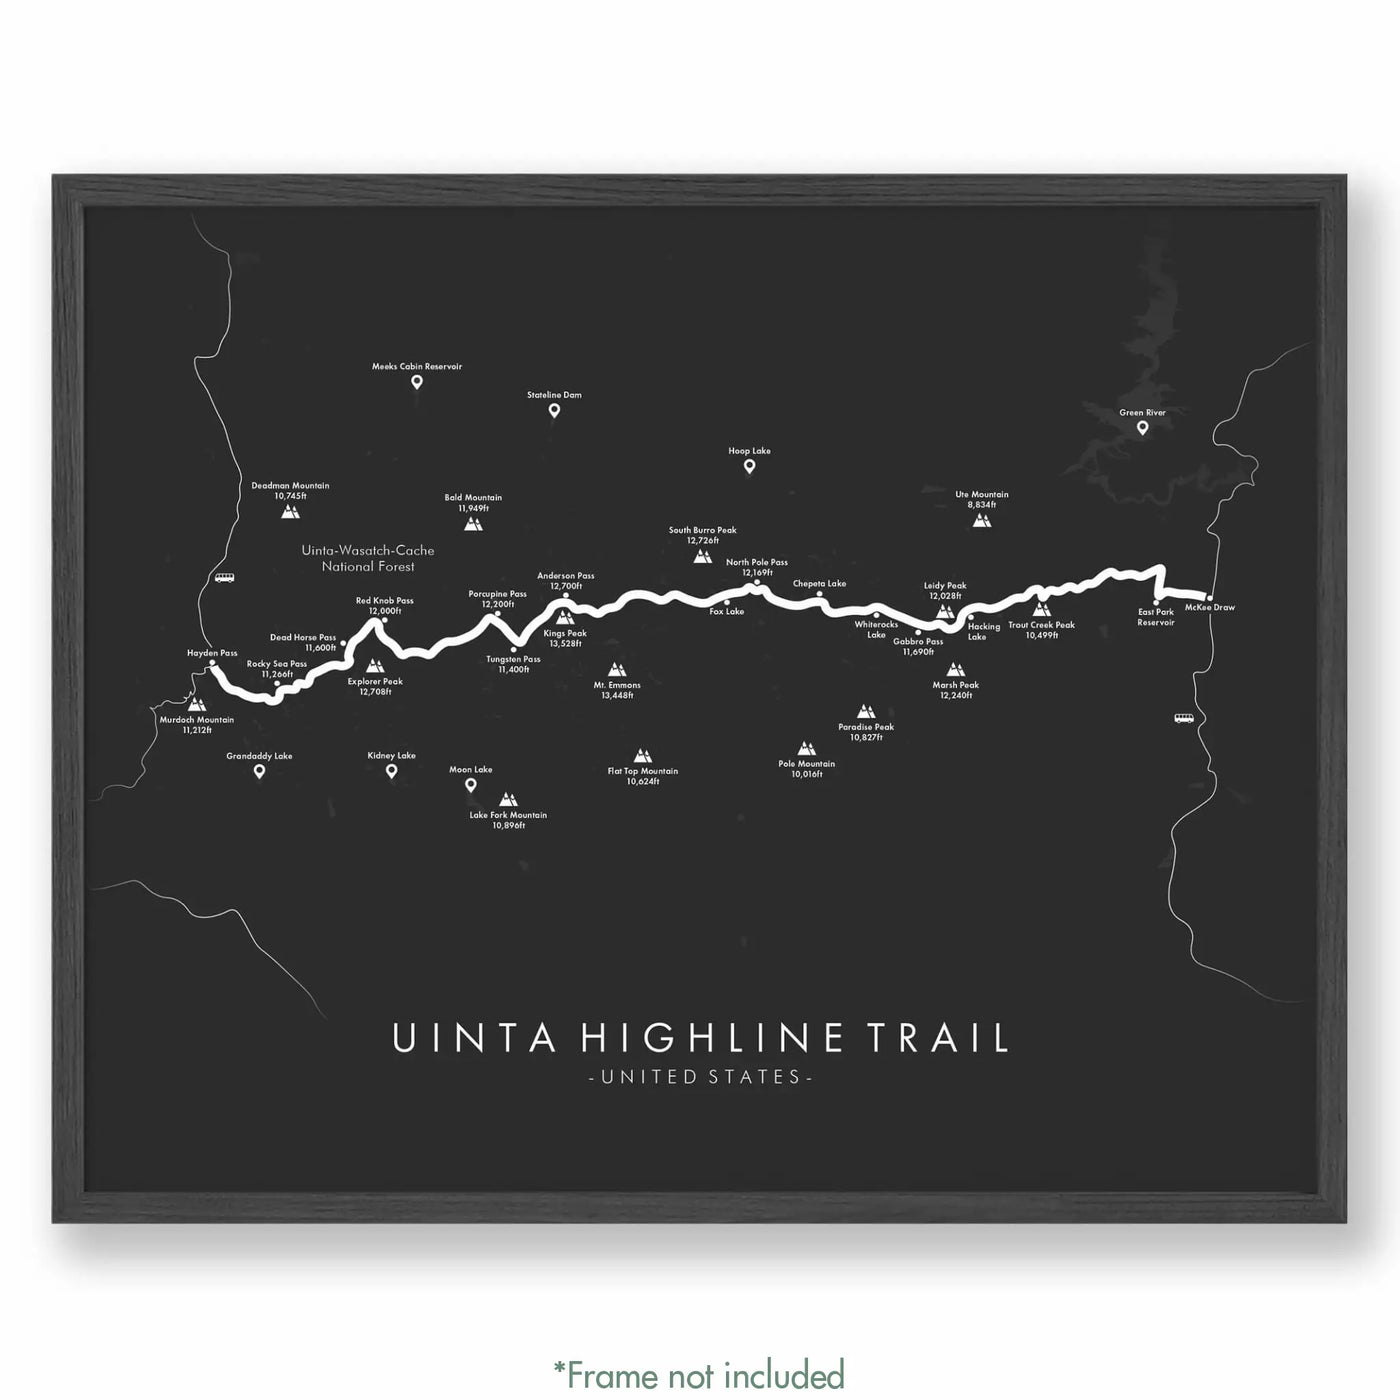 Trail Poster of Uinta Highline Trail - Grey